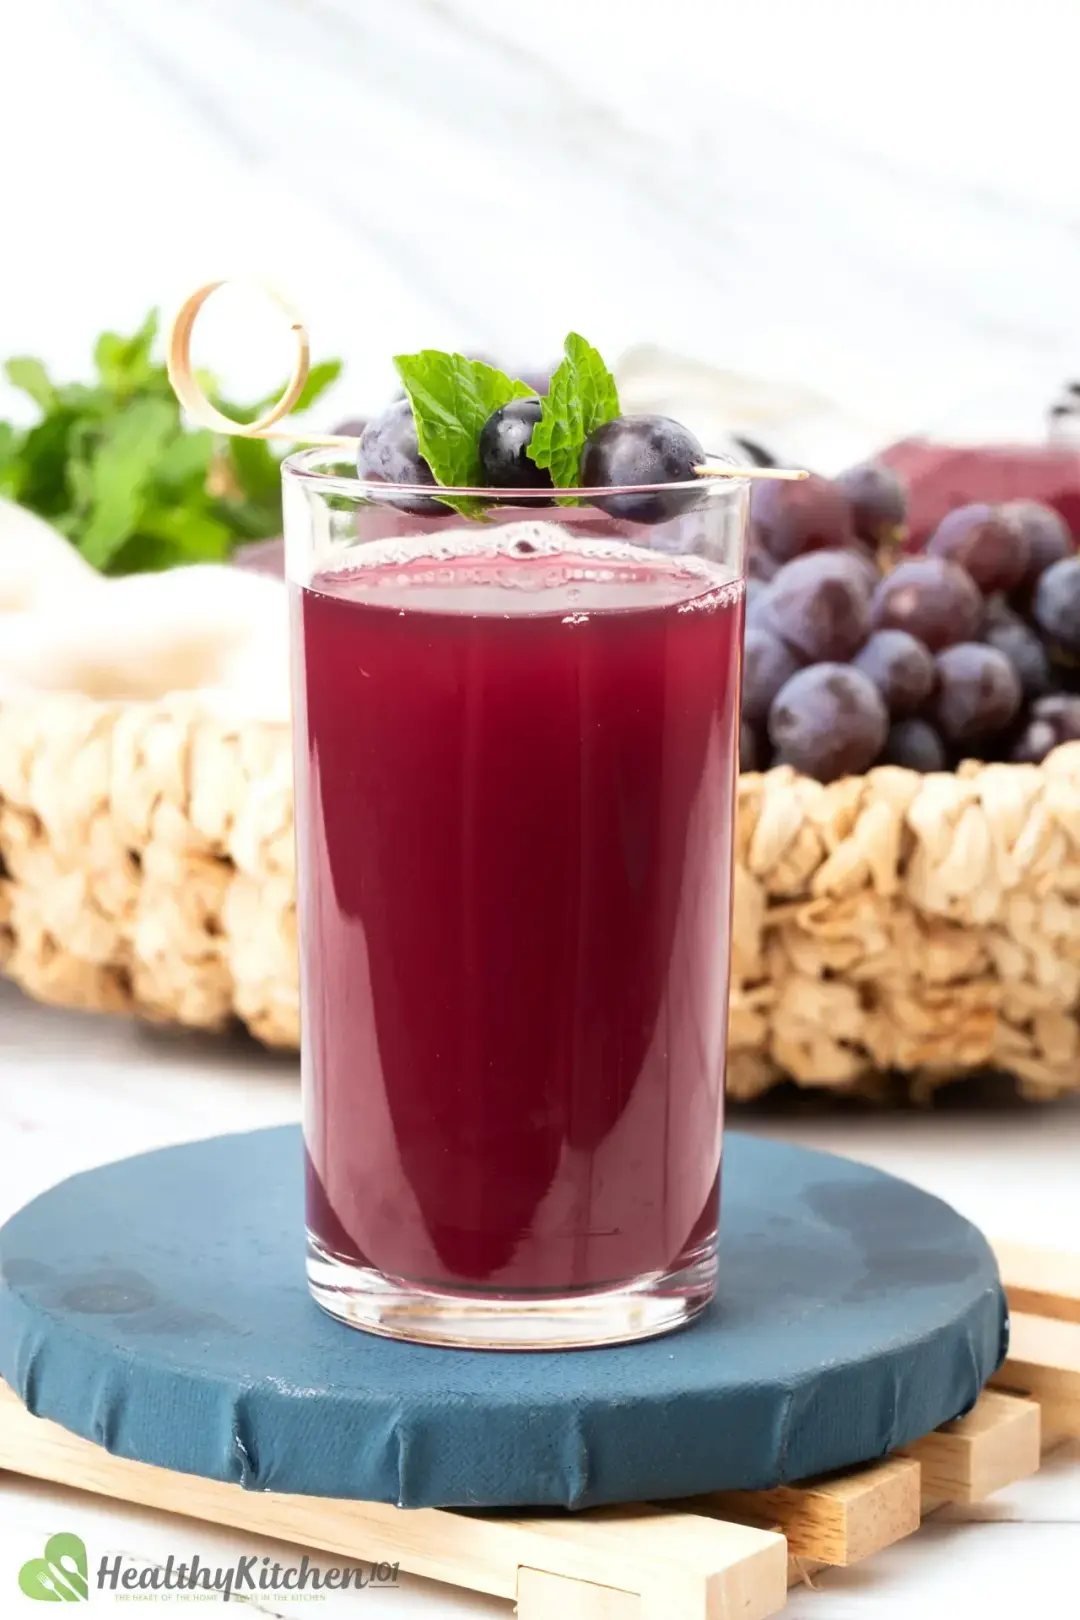 A tall glass of apple cider and grape juice drink garnished with mints and next to a basket of red grapes